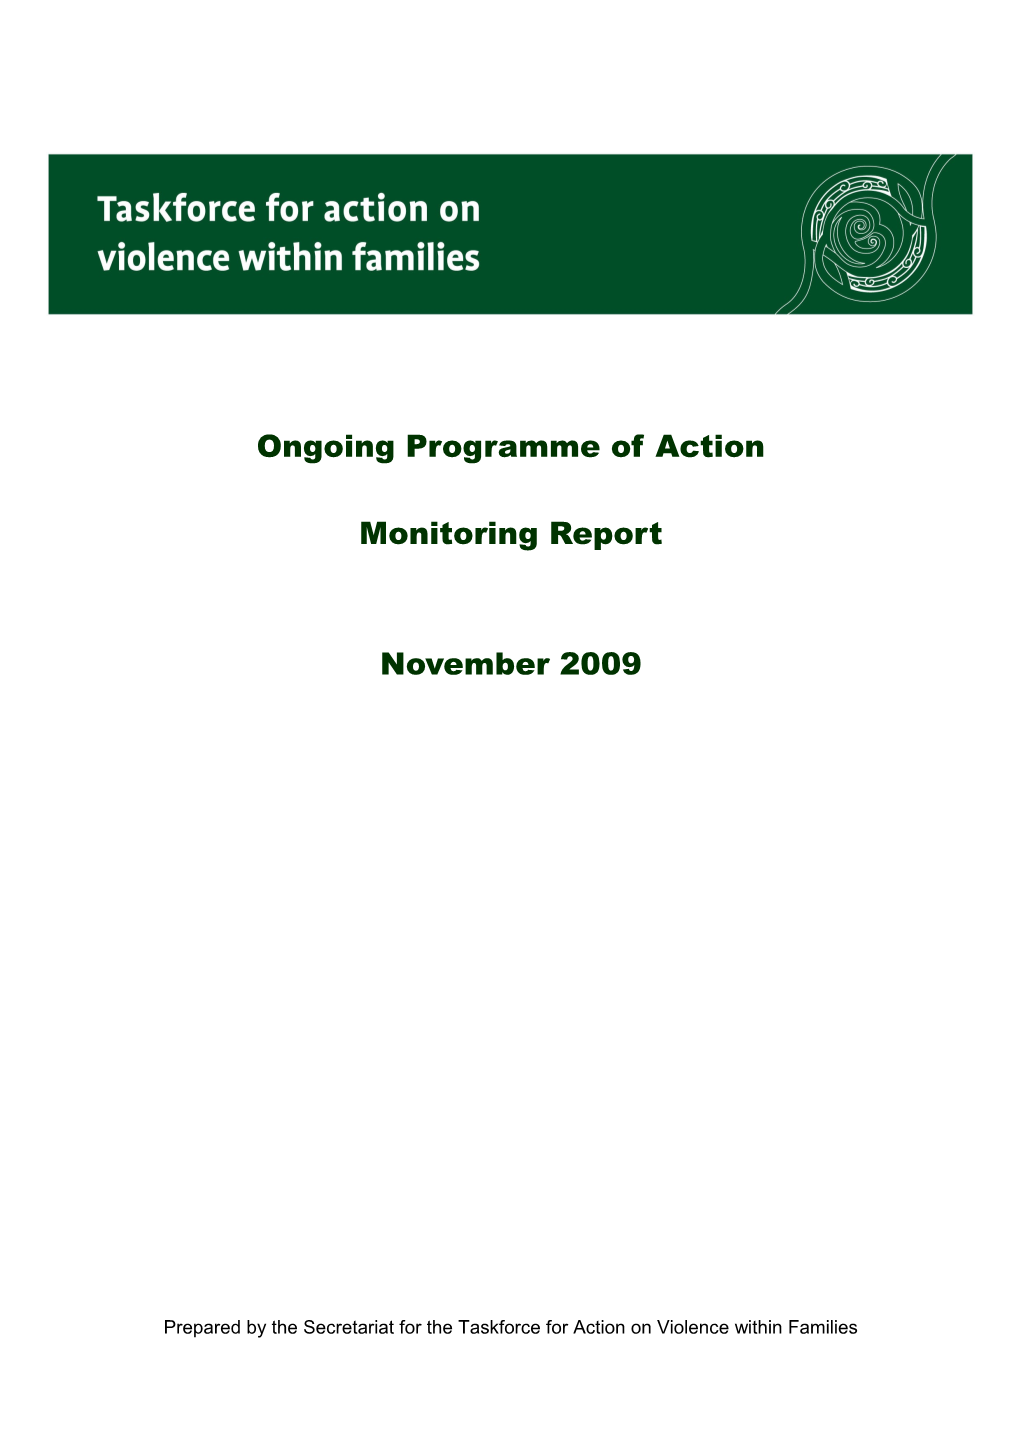 Ongoing Programme of Action s1